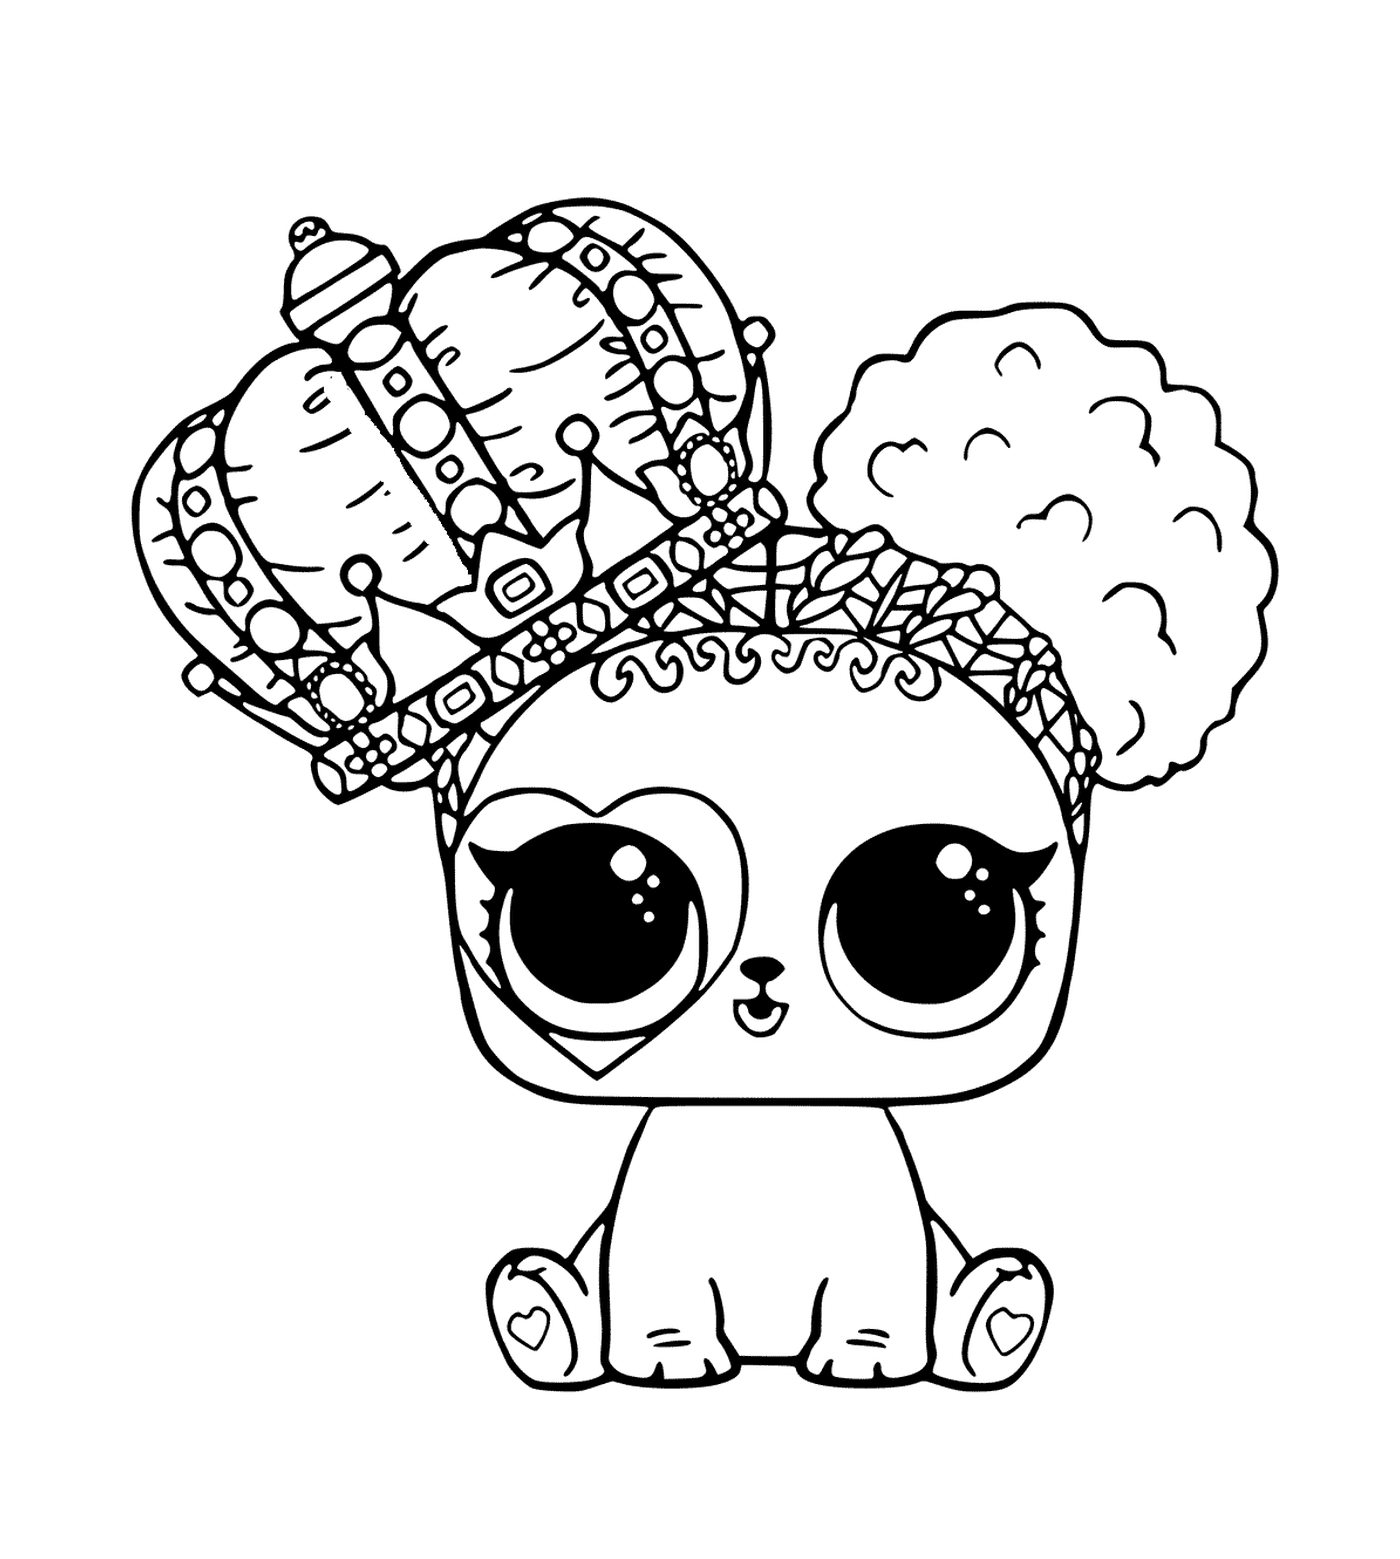  LOL animal queen with crown 